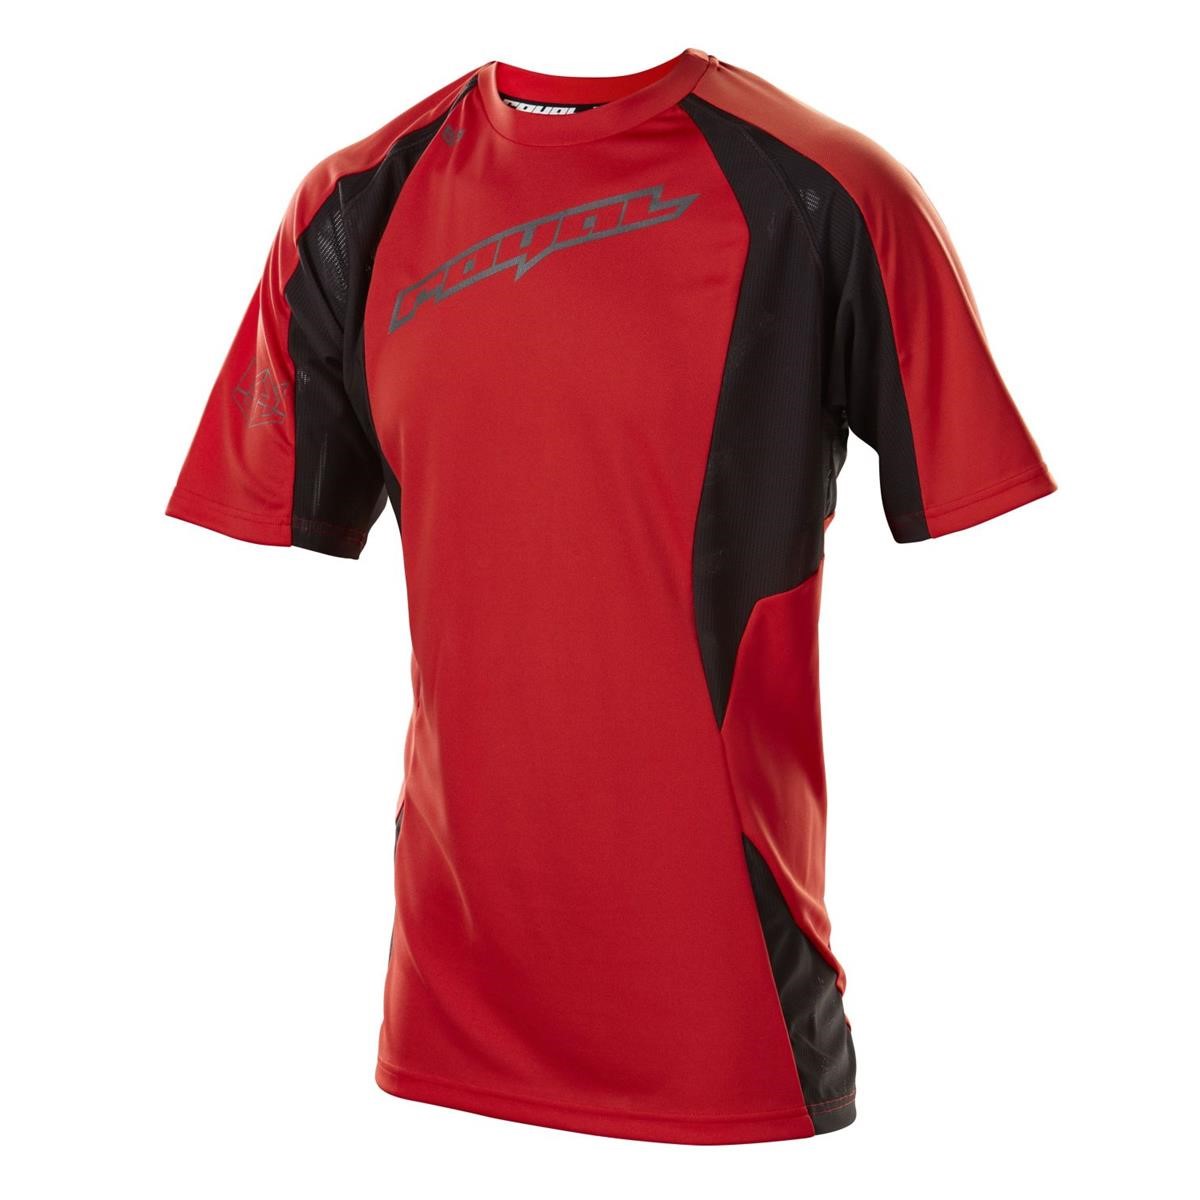 Royal Racing Maillot VTT Manches Courtes Turbulence Flo Red/Charcoal